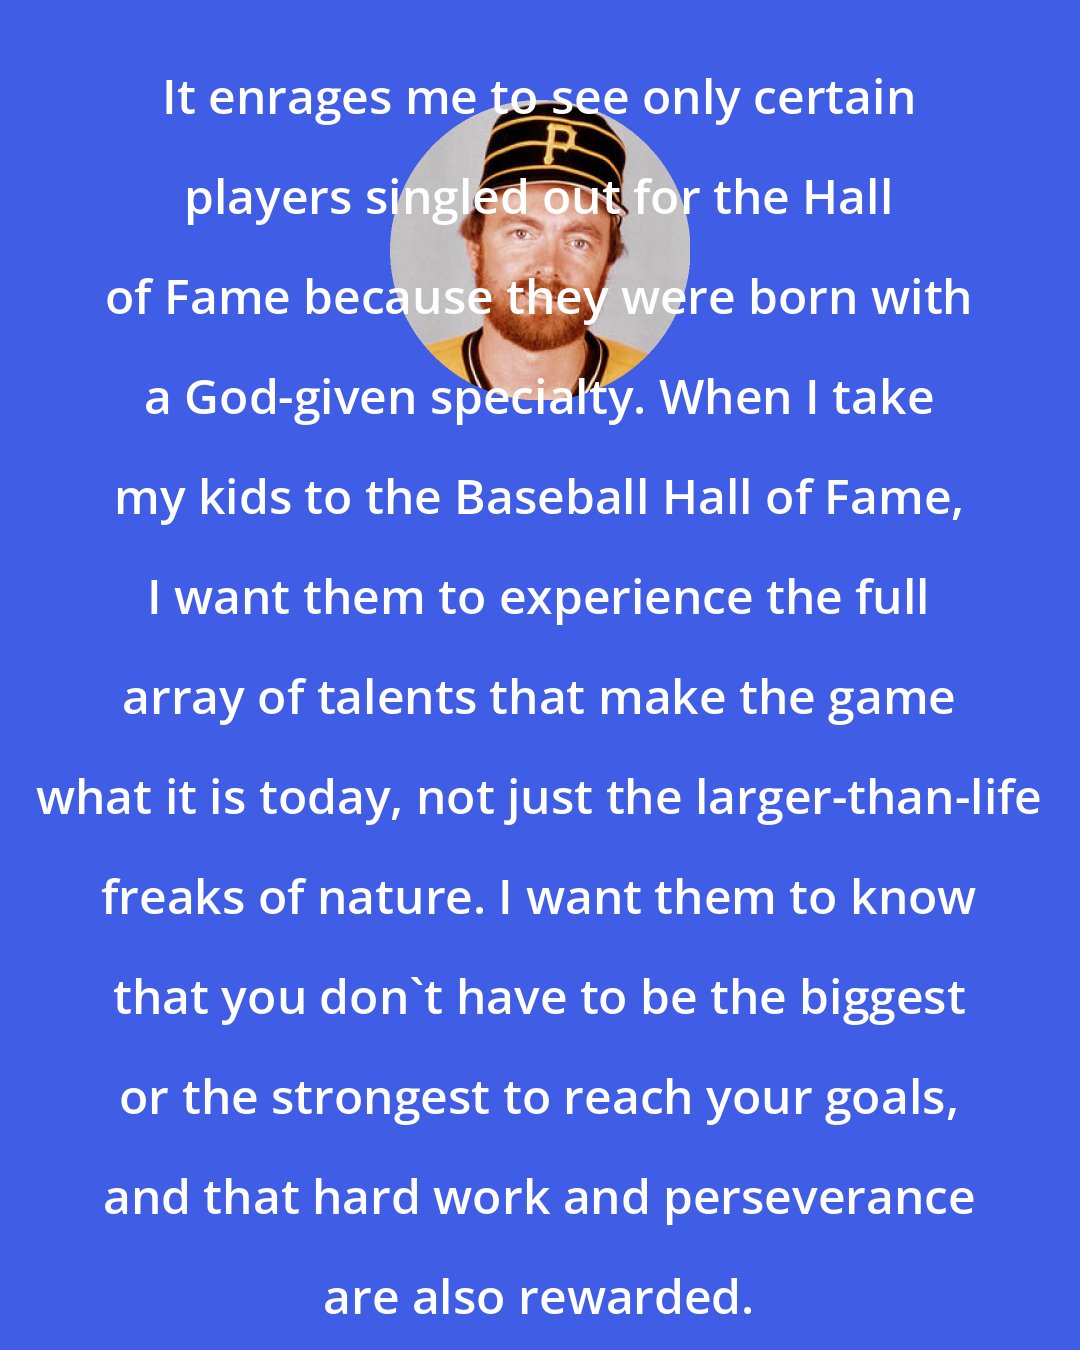 Bert Blyleven: It enrages me to see only certain players singled out for the Hall of Fame because they were born with a God-given specialty. When I take my kids to the Baseball Hall of Fame, I want them to experience the full array of talents that make the game what it is today, not just the larger-than-life freaks of nature. I want them to know that you don't have to be the biggest or the strongest to reach your goals, and that hard work and perseverance are also rewarded.